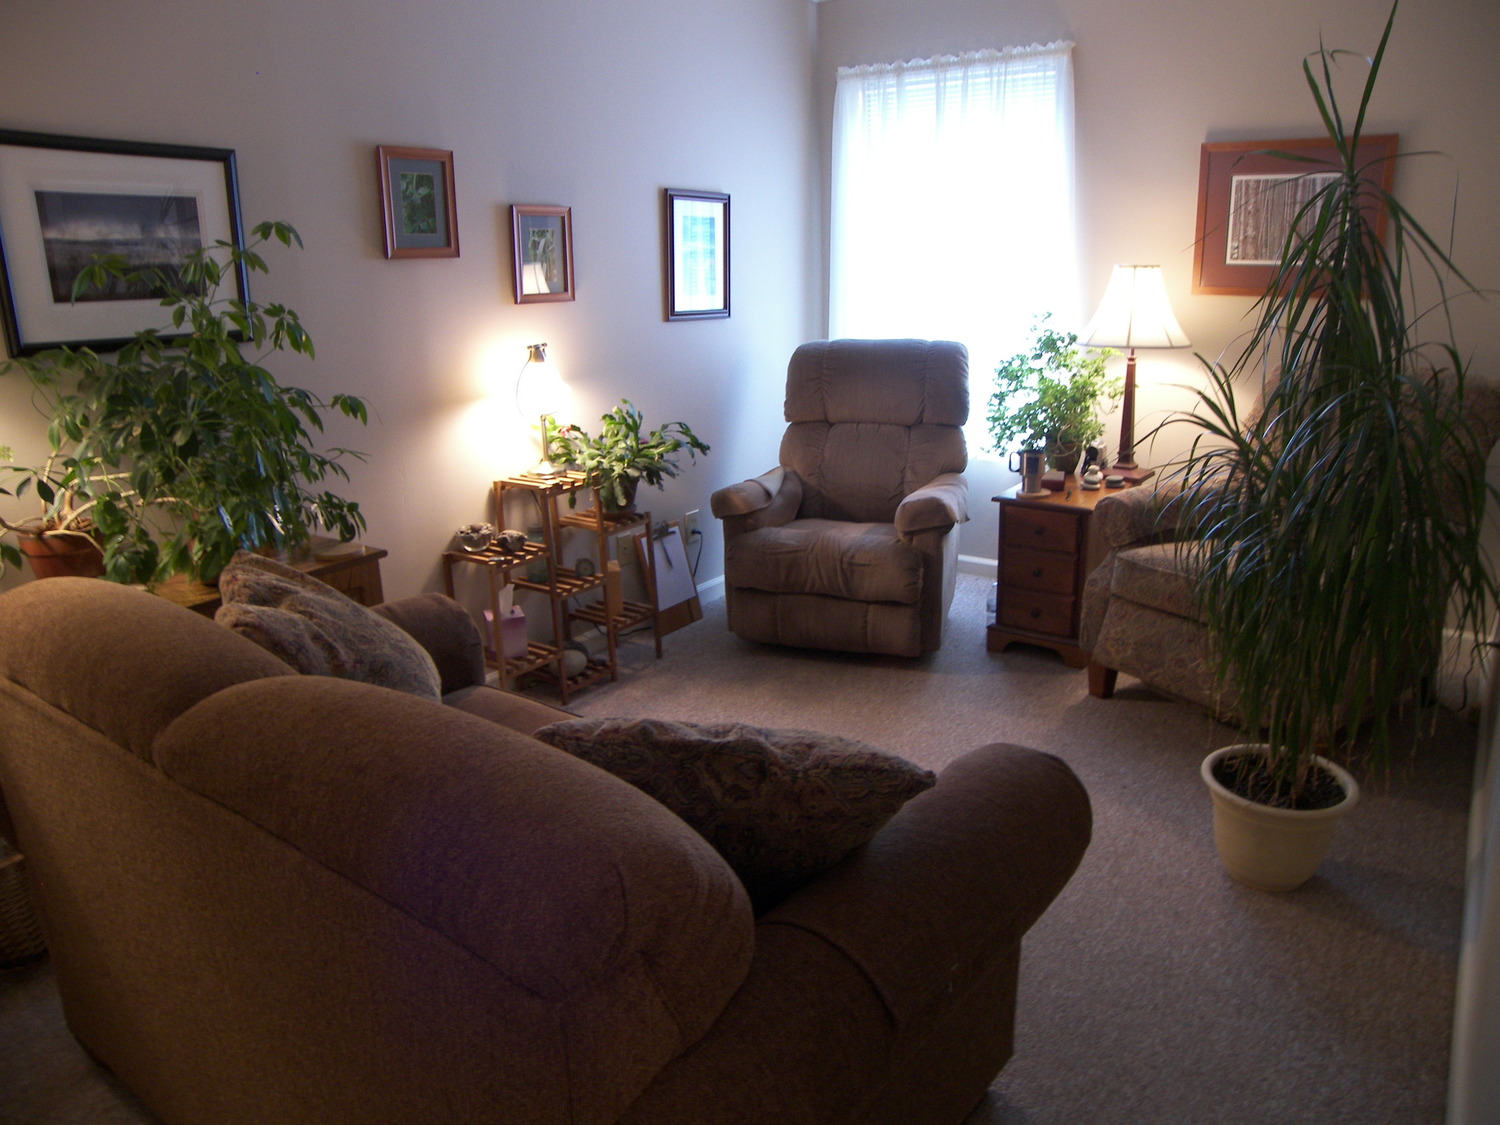 Gallery Photo of Counseling space